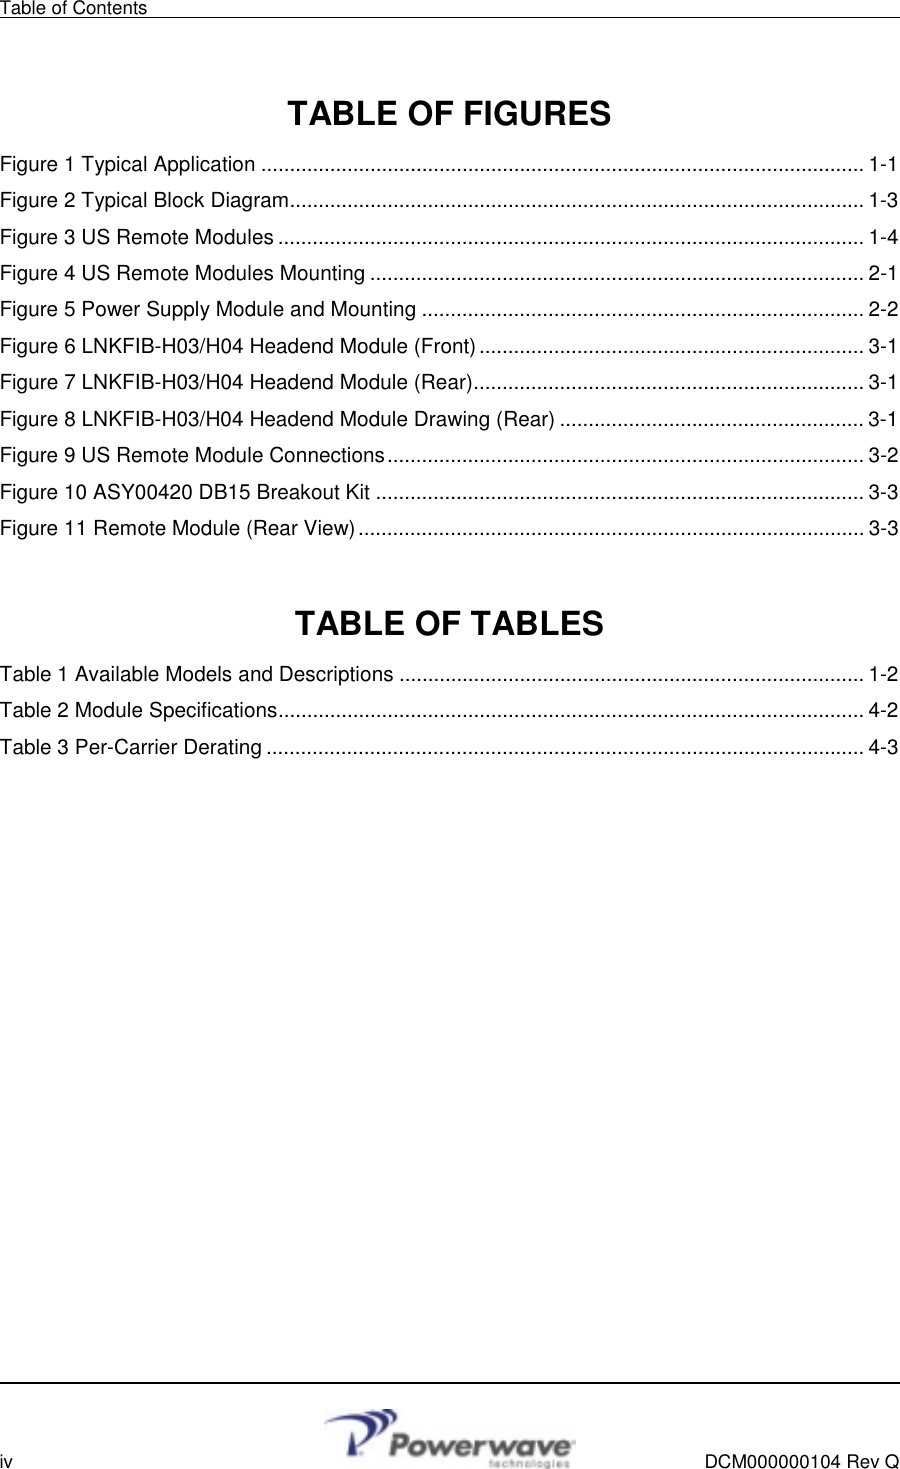 Table of Contents        iv    DCM000000104 Rev Q  TABLE OF FIGURES Figure 1 Typical Application ......................................................................................................... 1-1 Figure 2 Typical Block Diagram.................................................................................................... 1-3 Figure 3 US Remote Modules ......................................................................................................1-4 Figure 4 US Remote Modules Mounting ...................................................................................... 2-1 Figure 5 Power Supply Module and Mounting ............................................................................. 2-2 Figure 6 LNKFIB-H03/H04 Headend Module (Front)................................................................... 3-1 Figure 7 LNKFIB-H03/H04 Headend Module (Rear).................................................................... 3-1 Figure 8 LNKFIB-H03/H04 Headend Module Drawing (Rear) ..................................................... 3-1 Figure 9 US Remote Module Connections................................................................................... 3-2 Figure 10 ASY00420 DB15 Breakout Kit ..................................................................................... 3-3 Figure 11 Remote Module (Rear View)........................................................................................ 3-3  TABLE OF TABLES Table 1 Available Models and Descriptions ................................................................................. 1-2 Table 2 Module Specifications...................................................................................................... 4-2 Table 3 Per-Carrier Derating ........................................................................................................ 4-3  